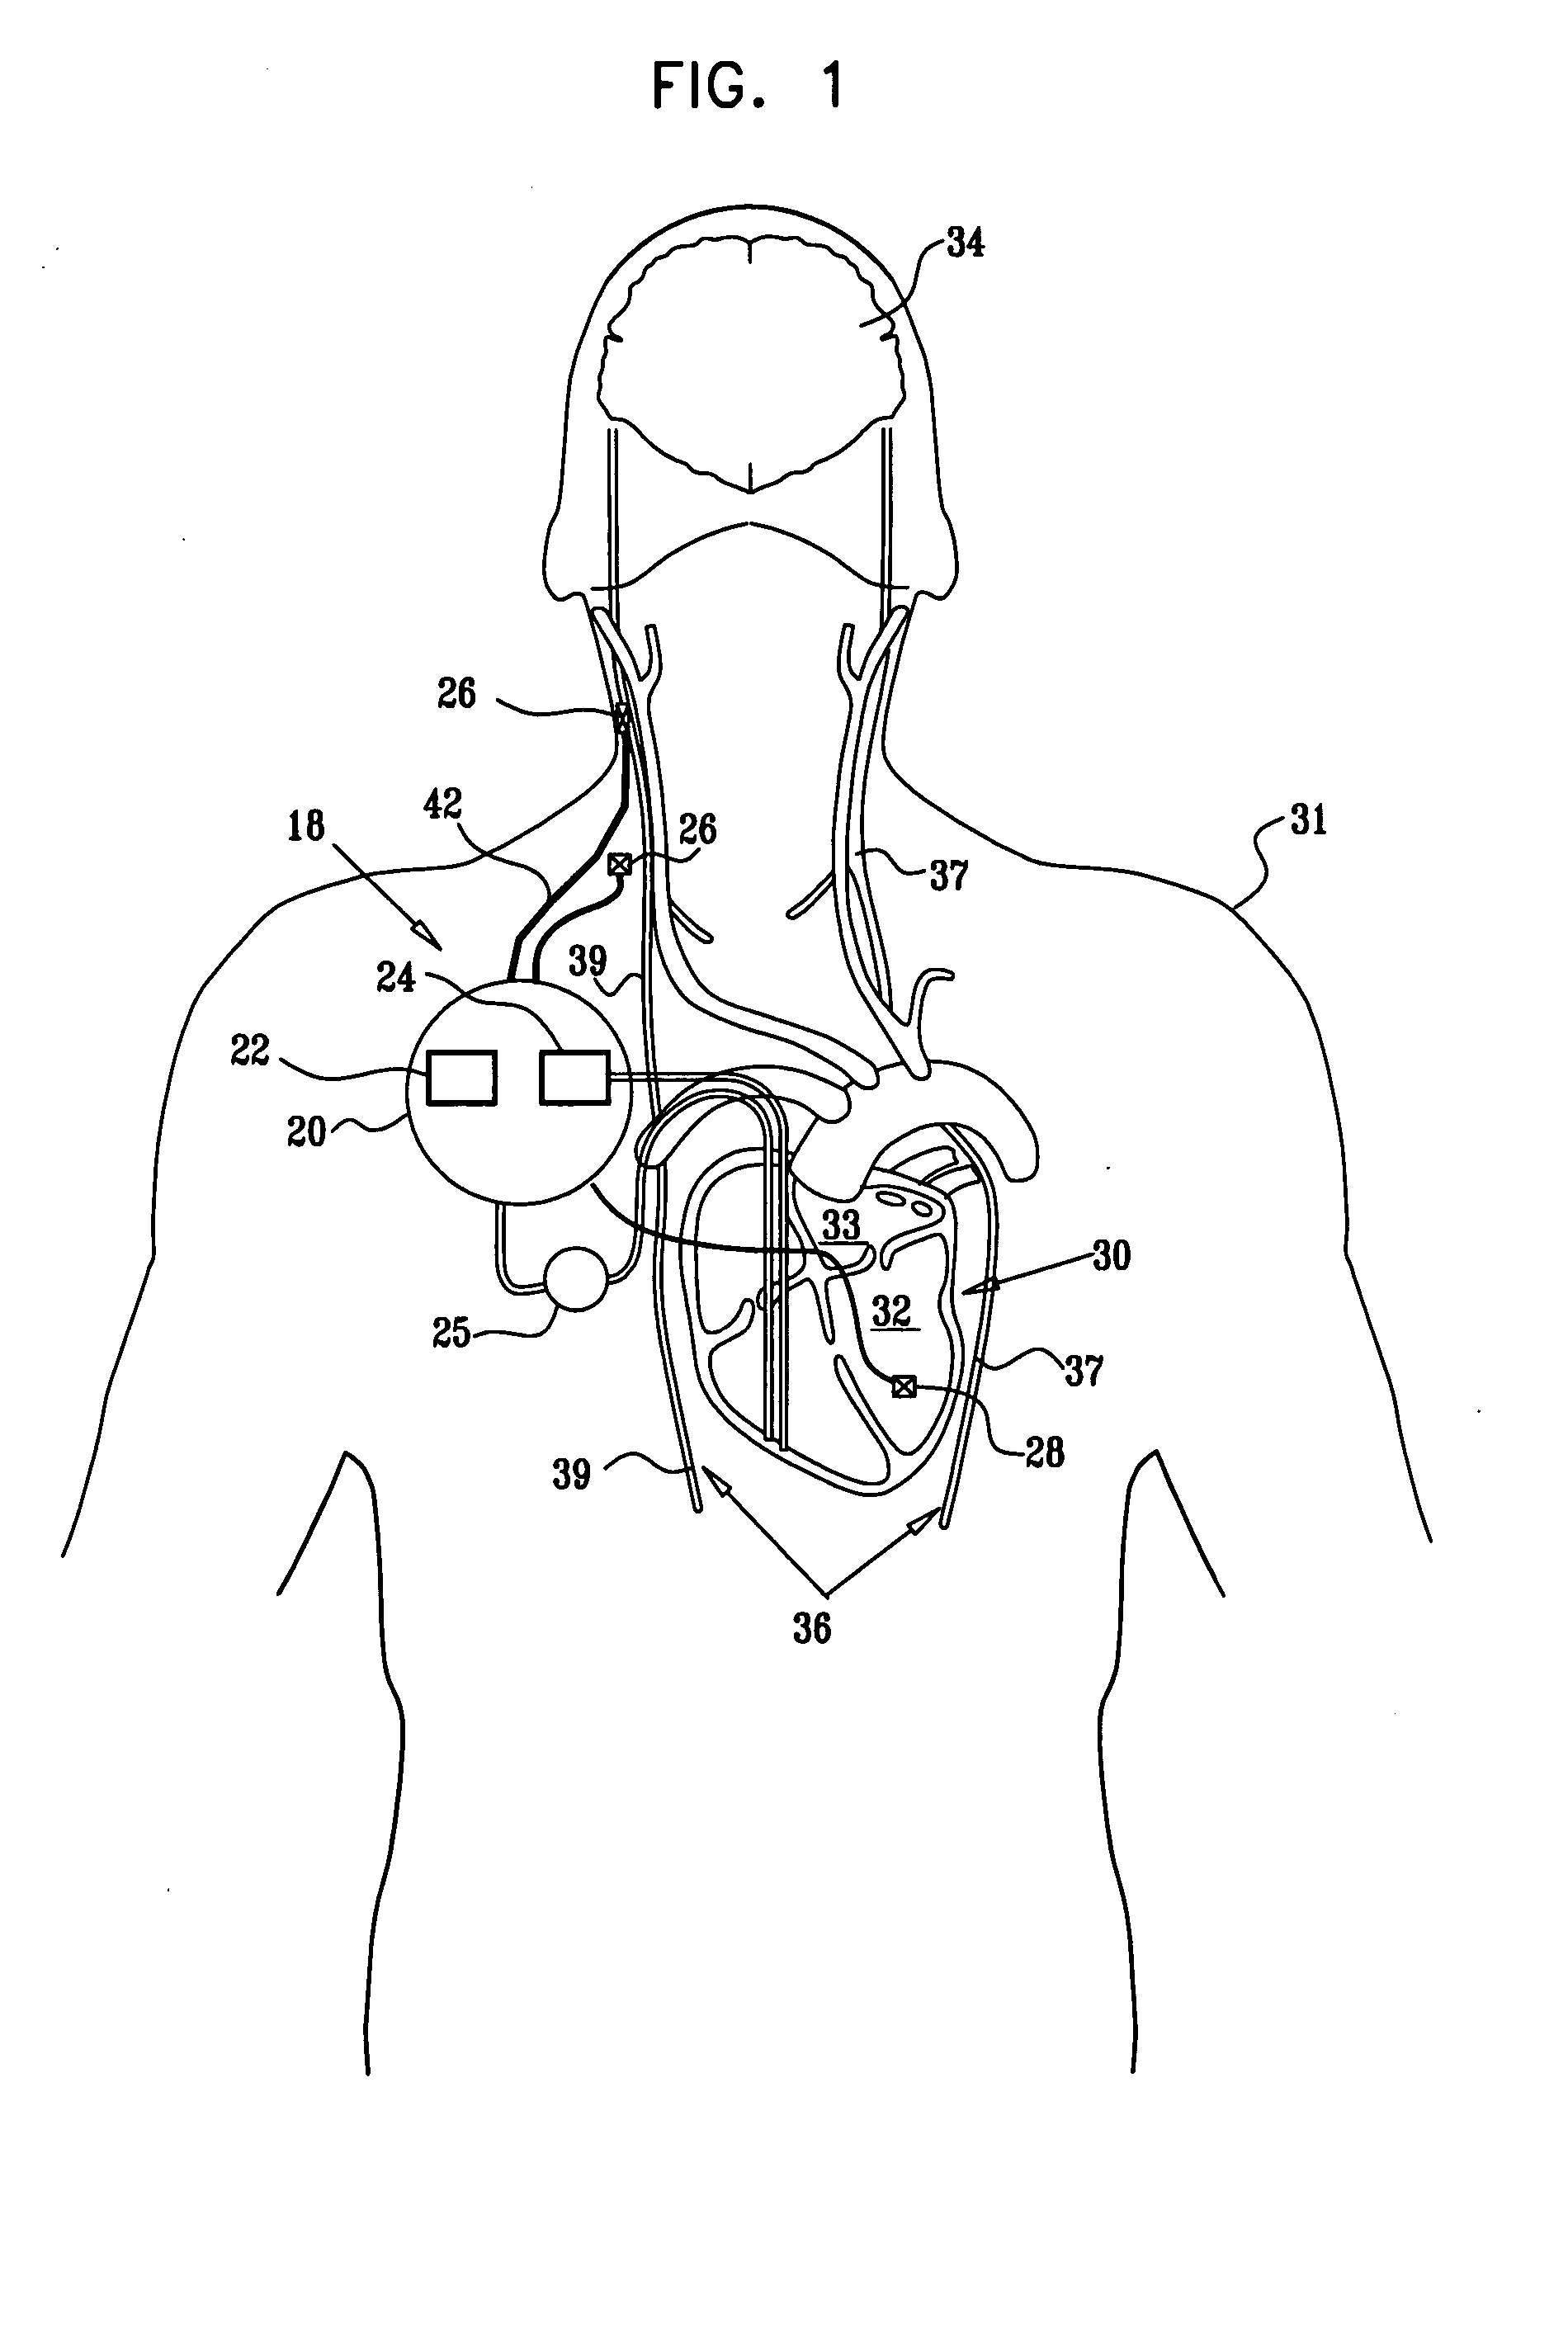 Techniques for applying, calibrating, and controlling nerve fiber stimulation